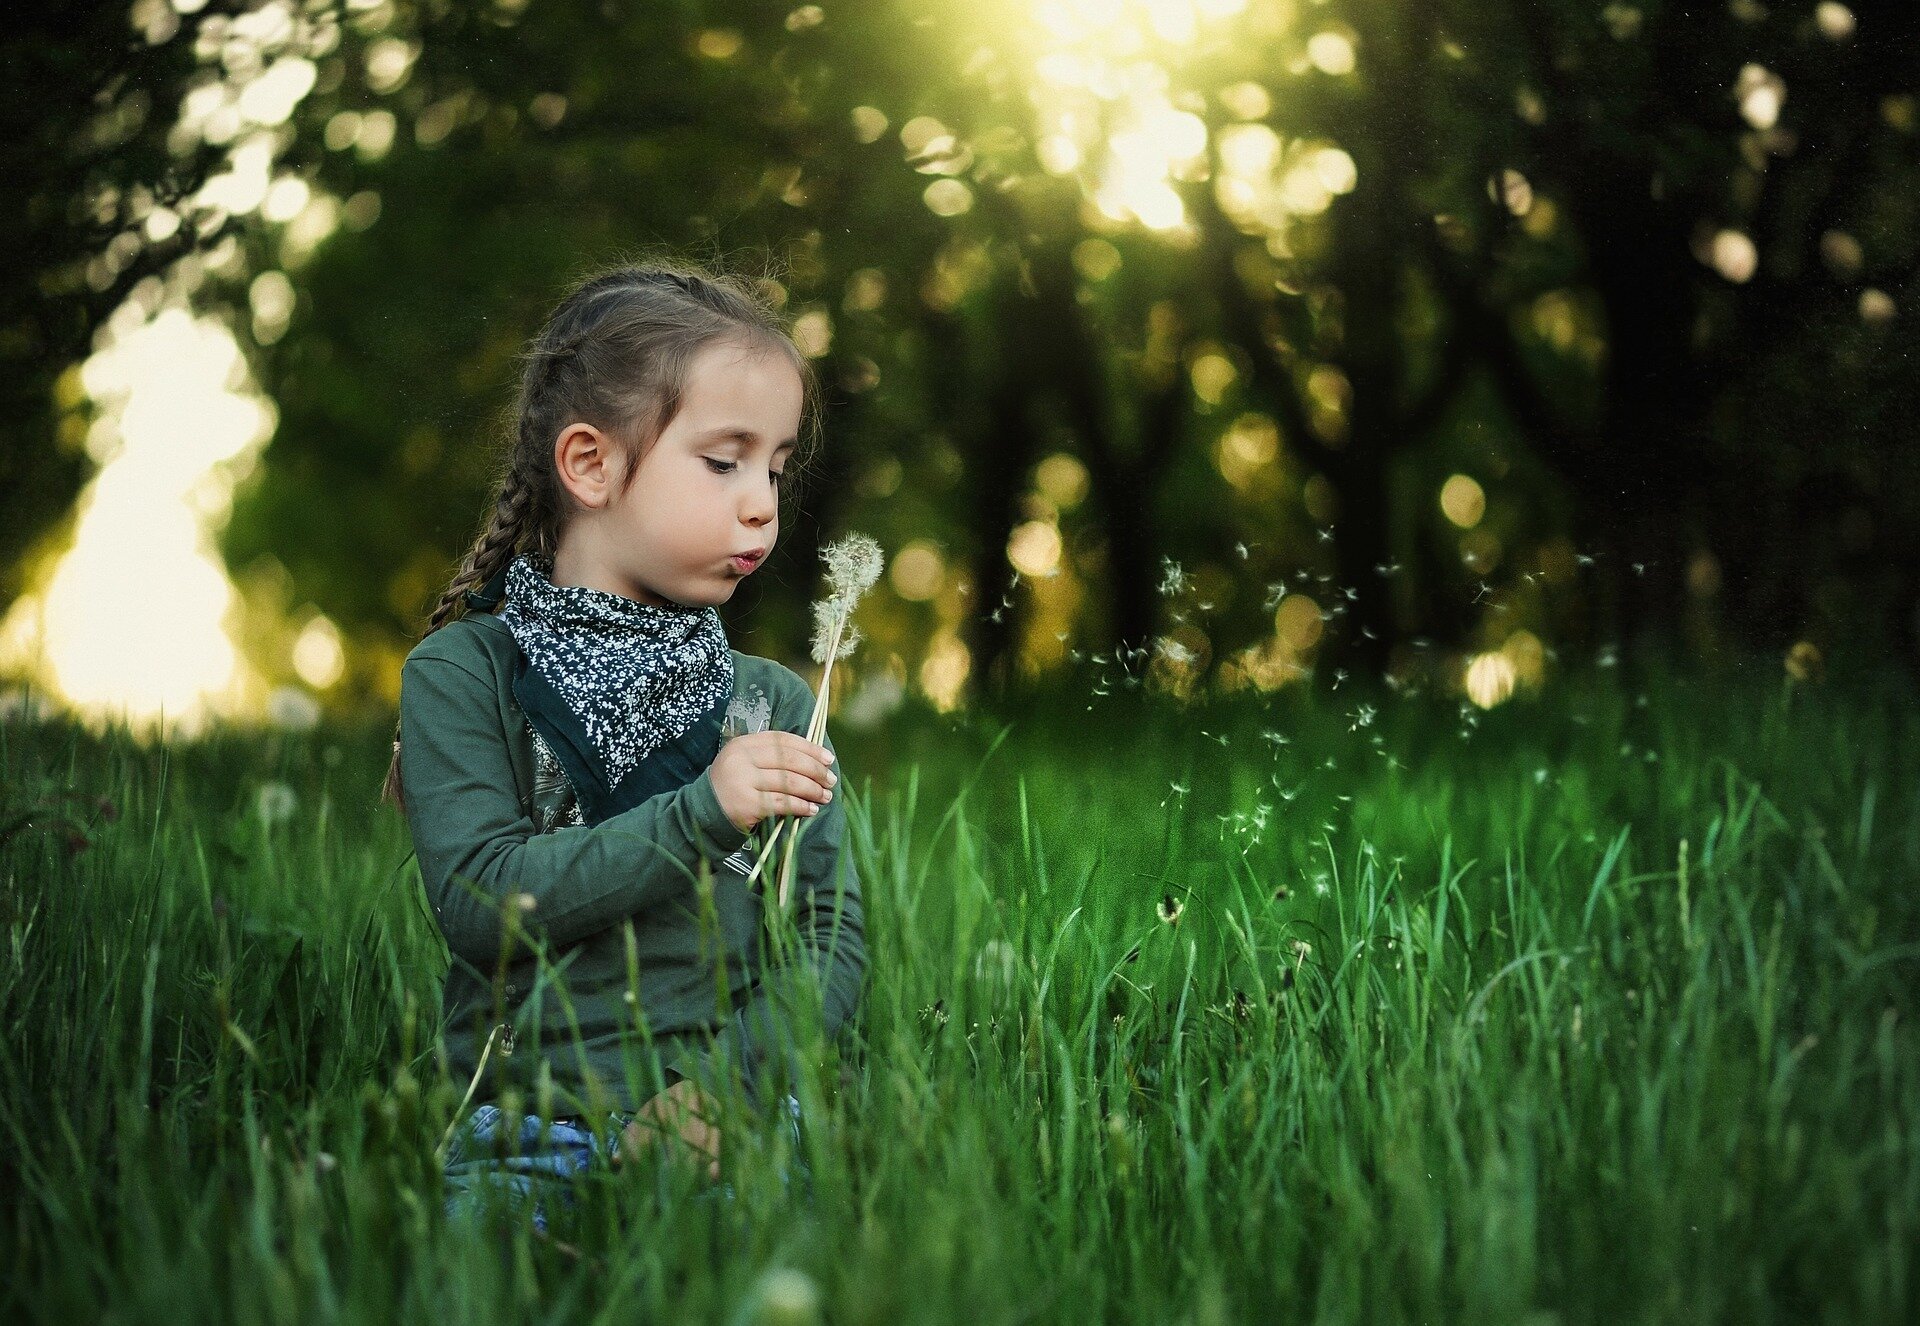 Children don't like nature as much as adults—but change with